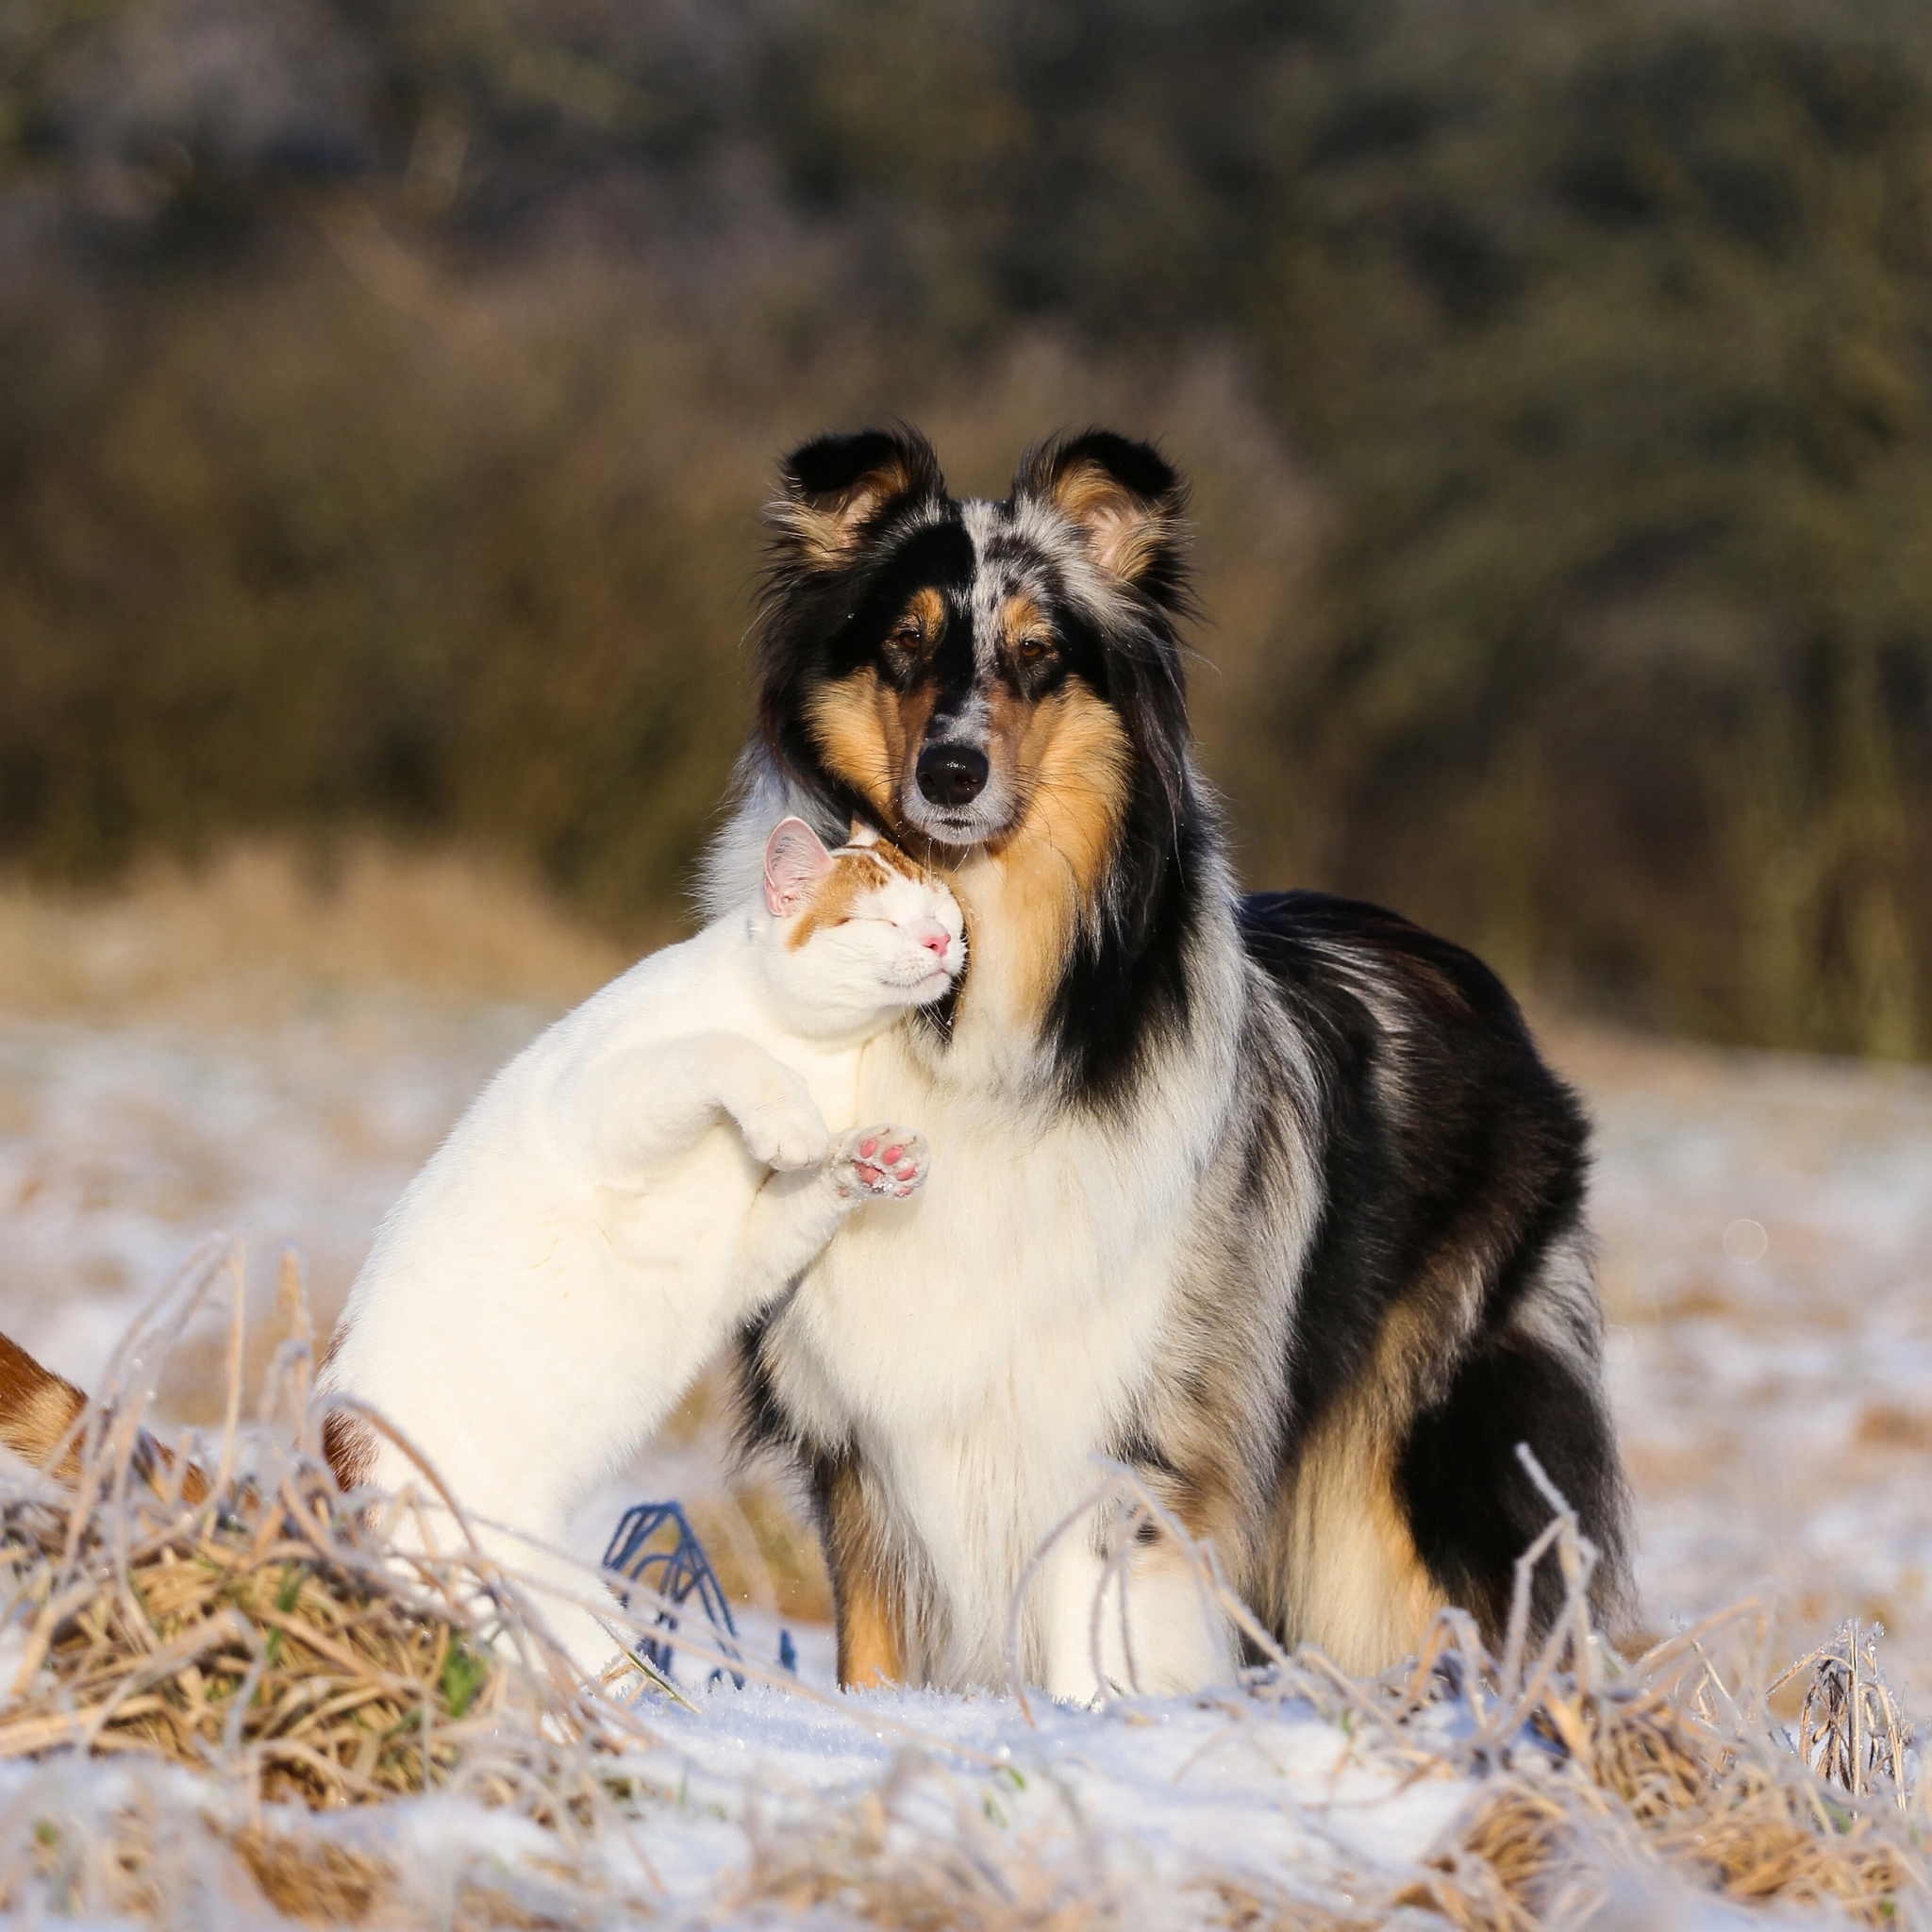 Friendship Cat and Dog Collie wallpaper 2048x2048